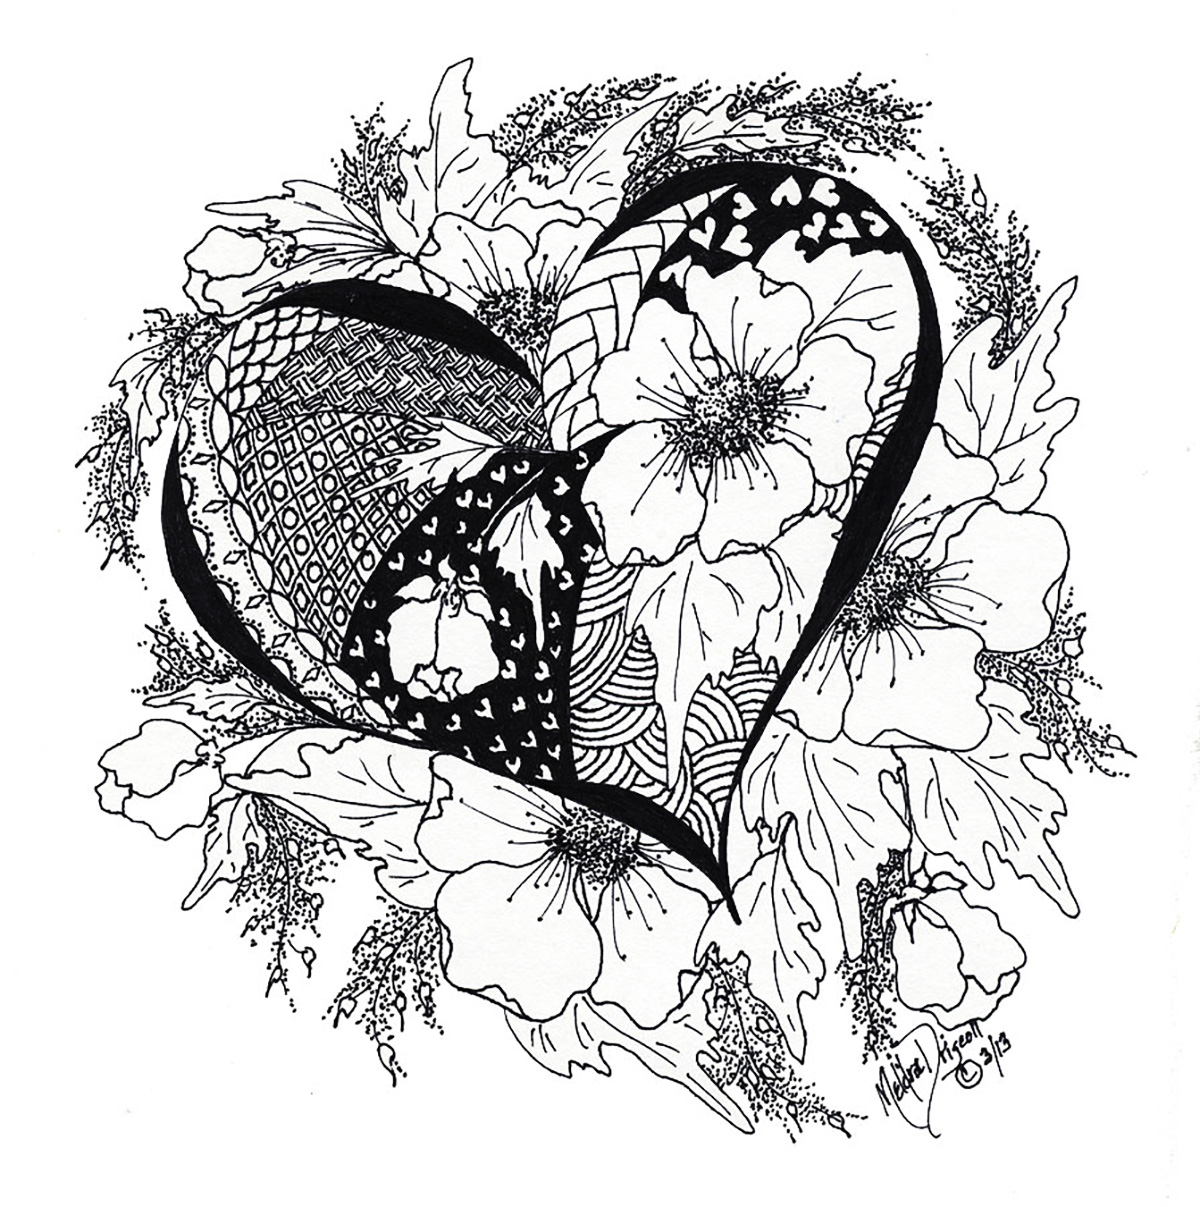 Heart With Flowers Coloring Pages